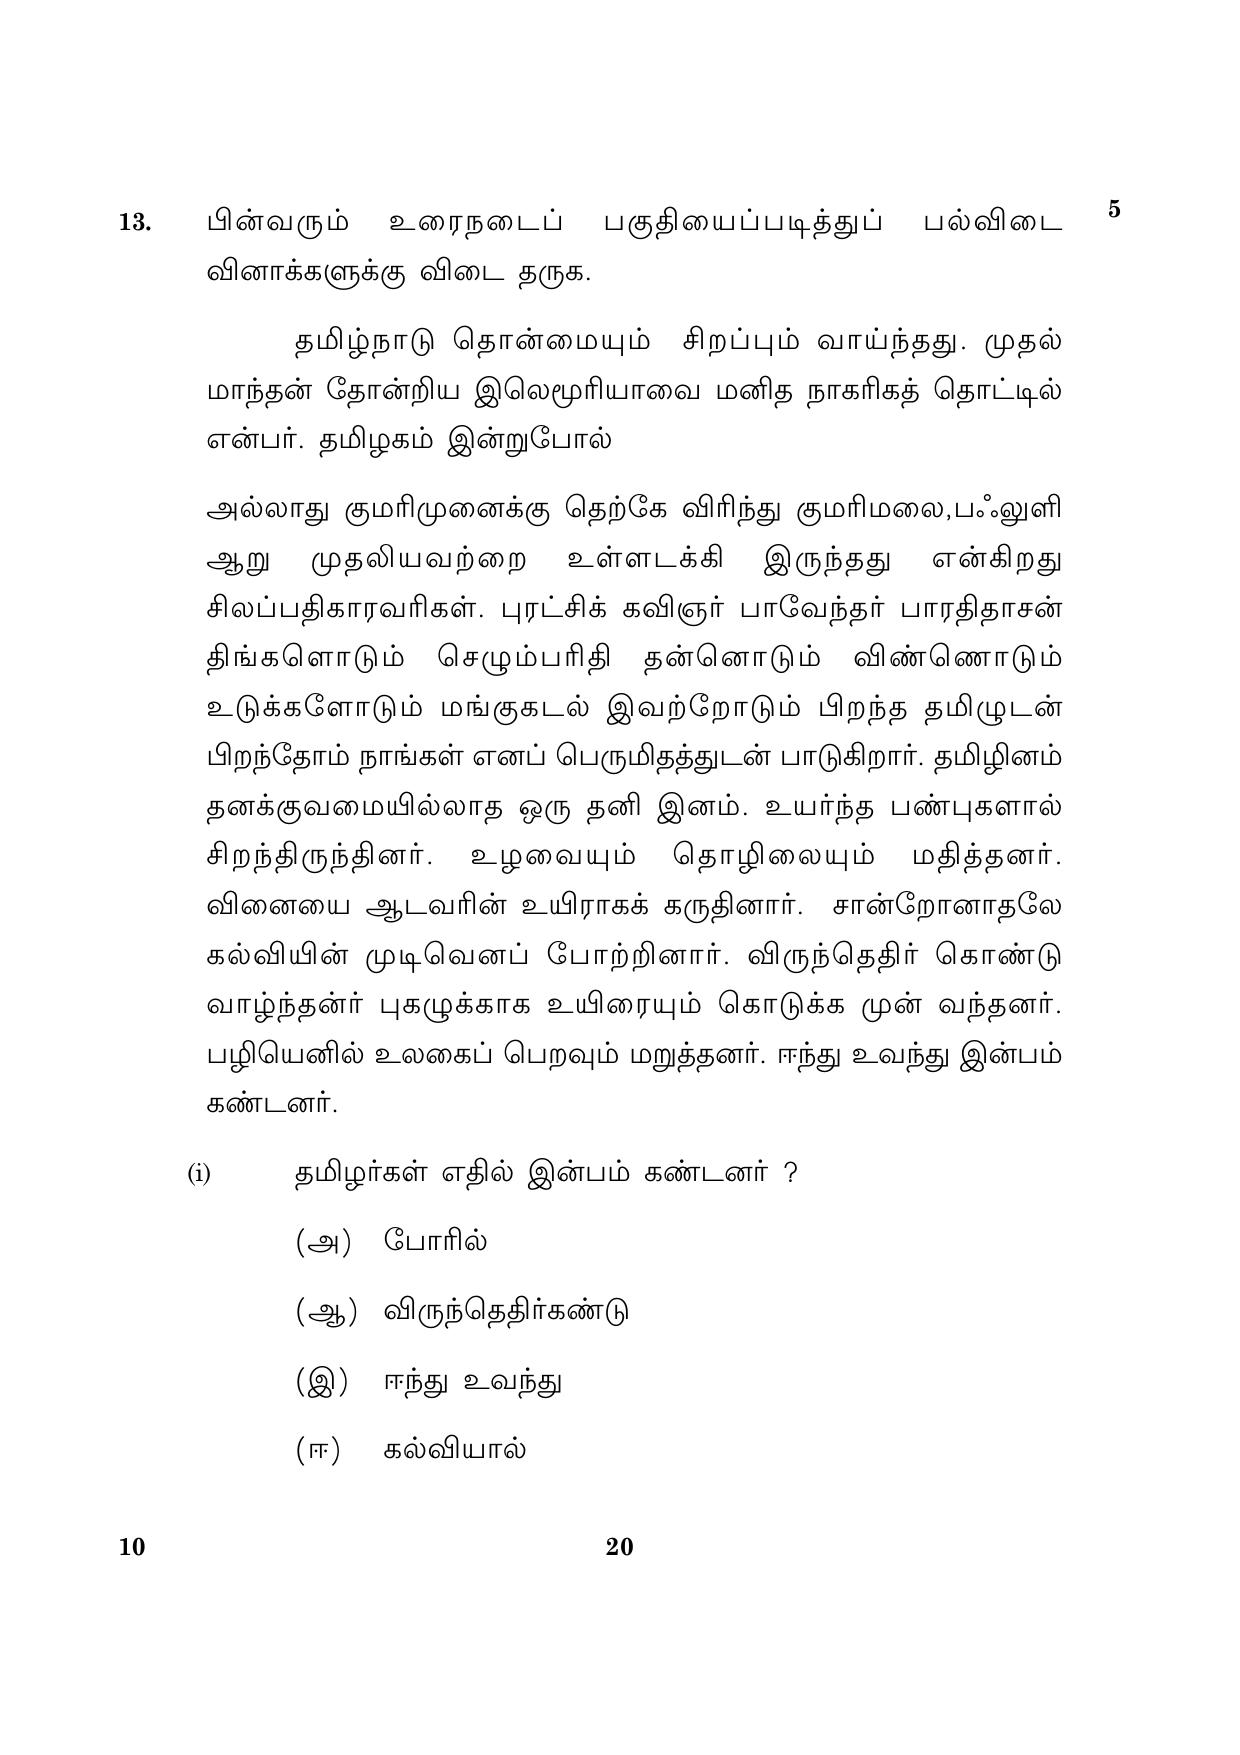 CBSE Class 10 010 Tamil 2016 Question Paper - Page 20